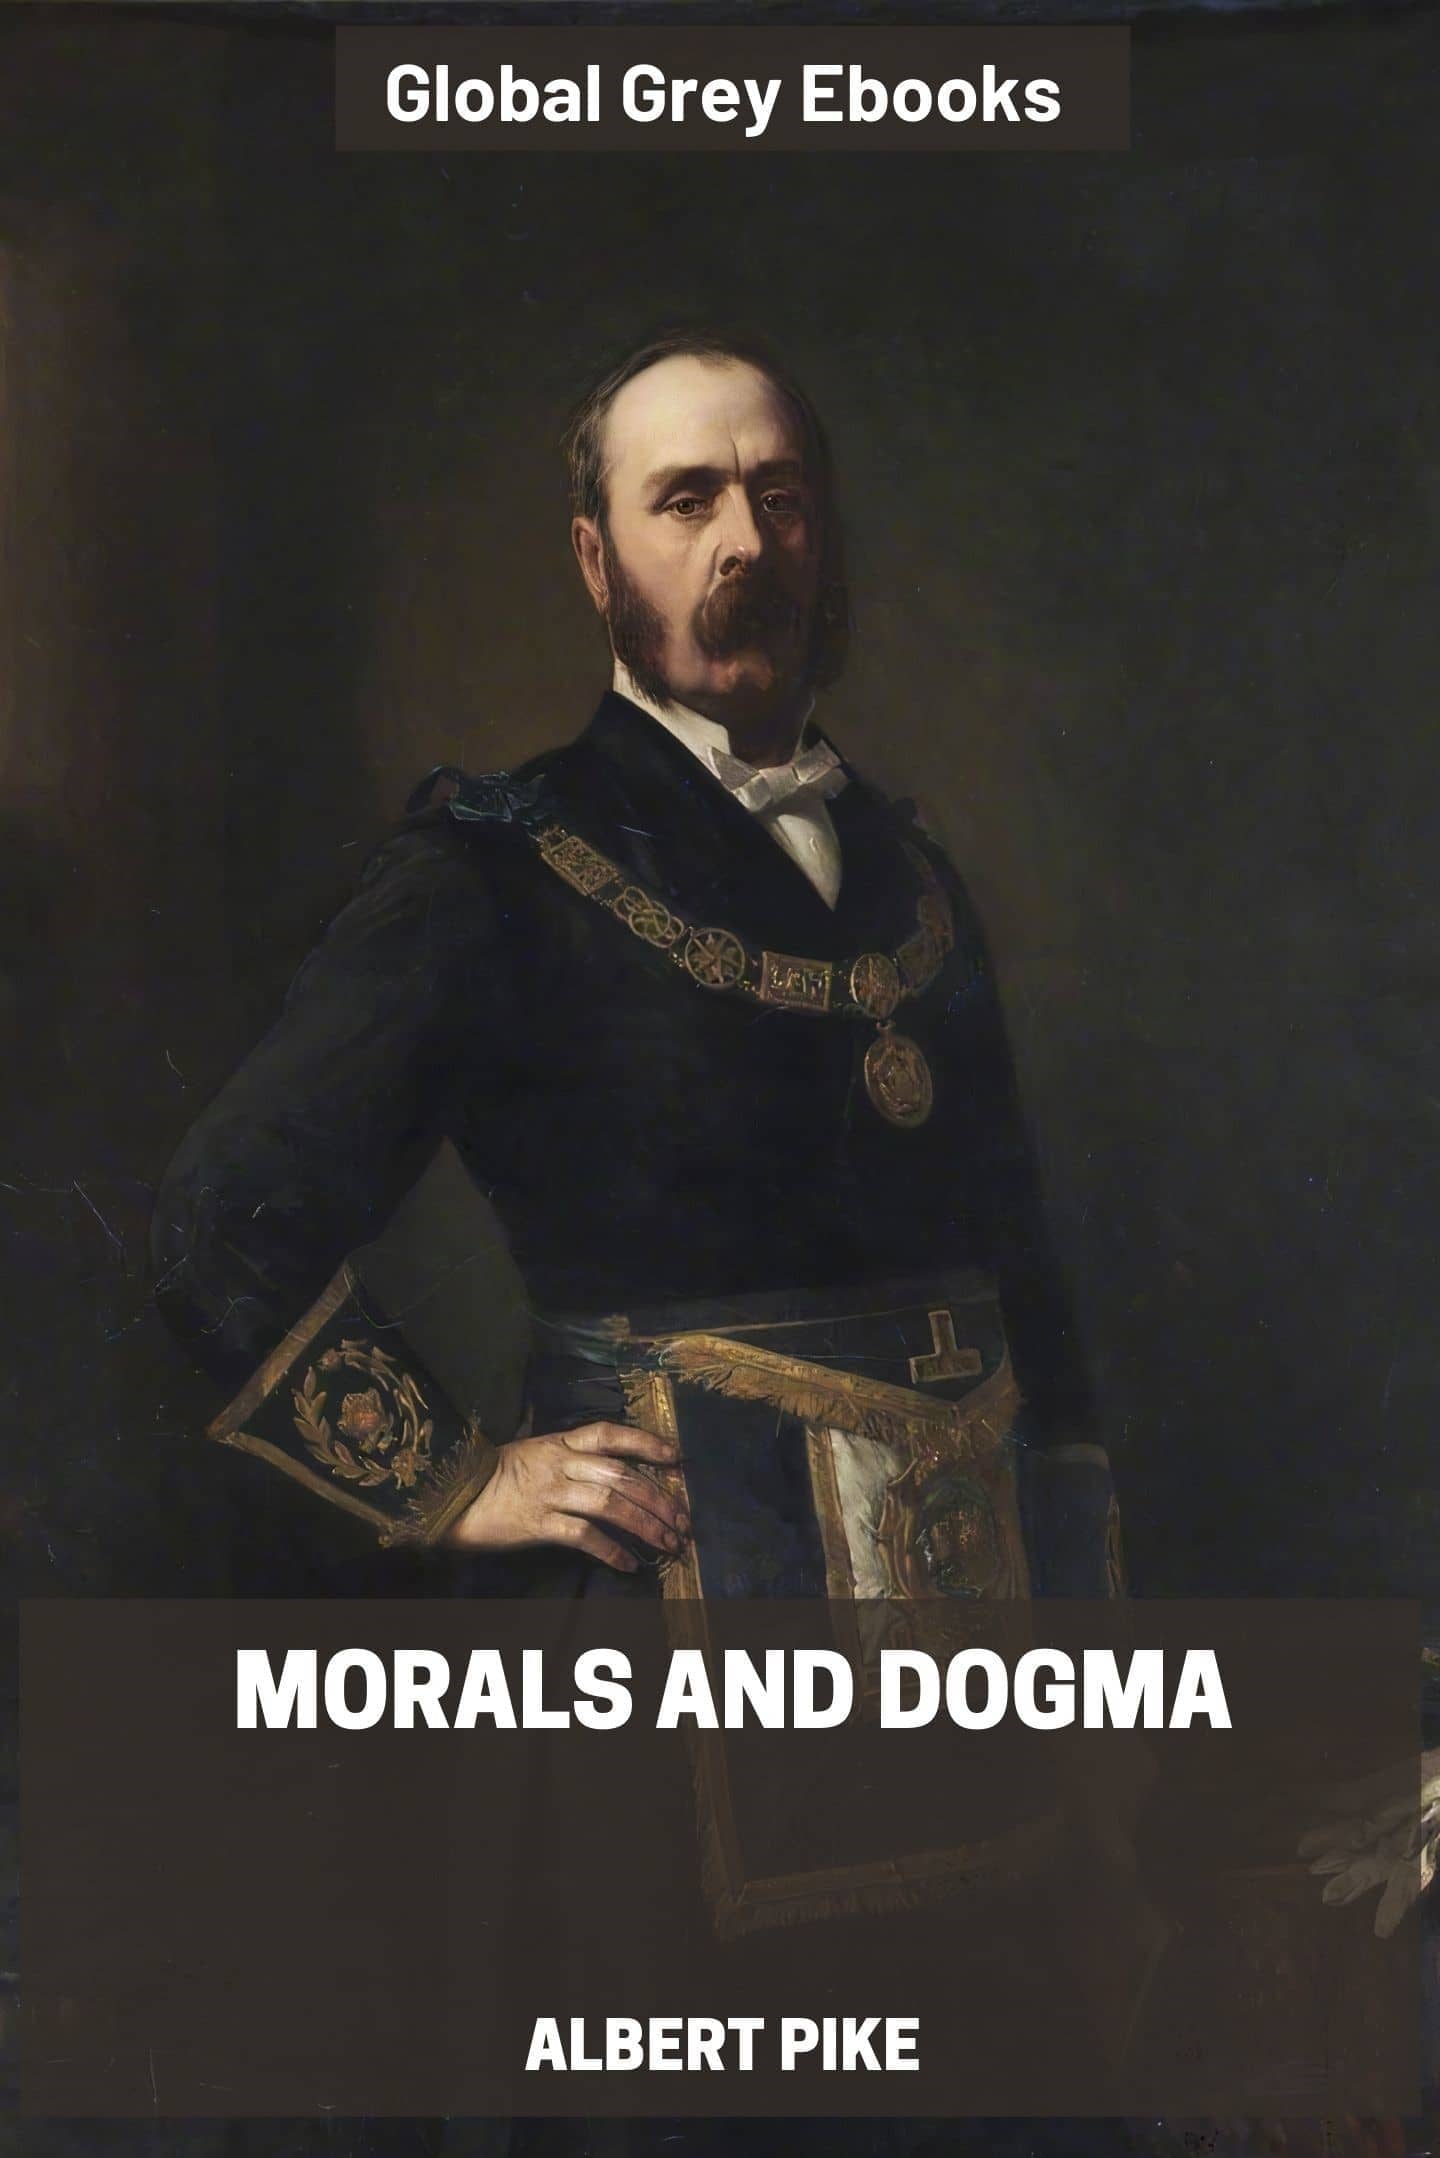 Morals and dogma pdf free download games for windows 7 free download